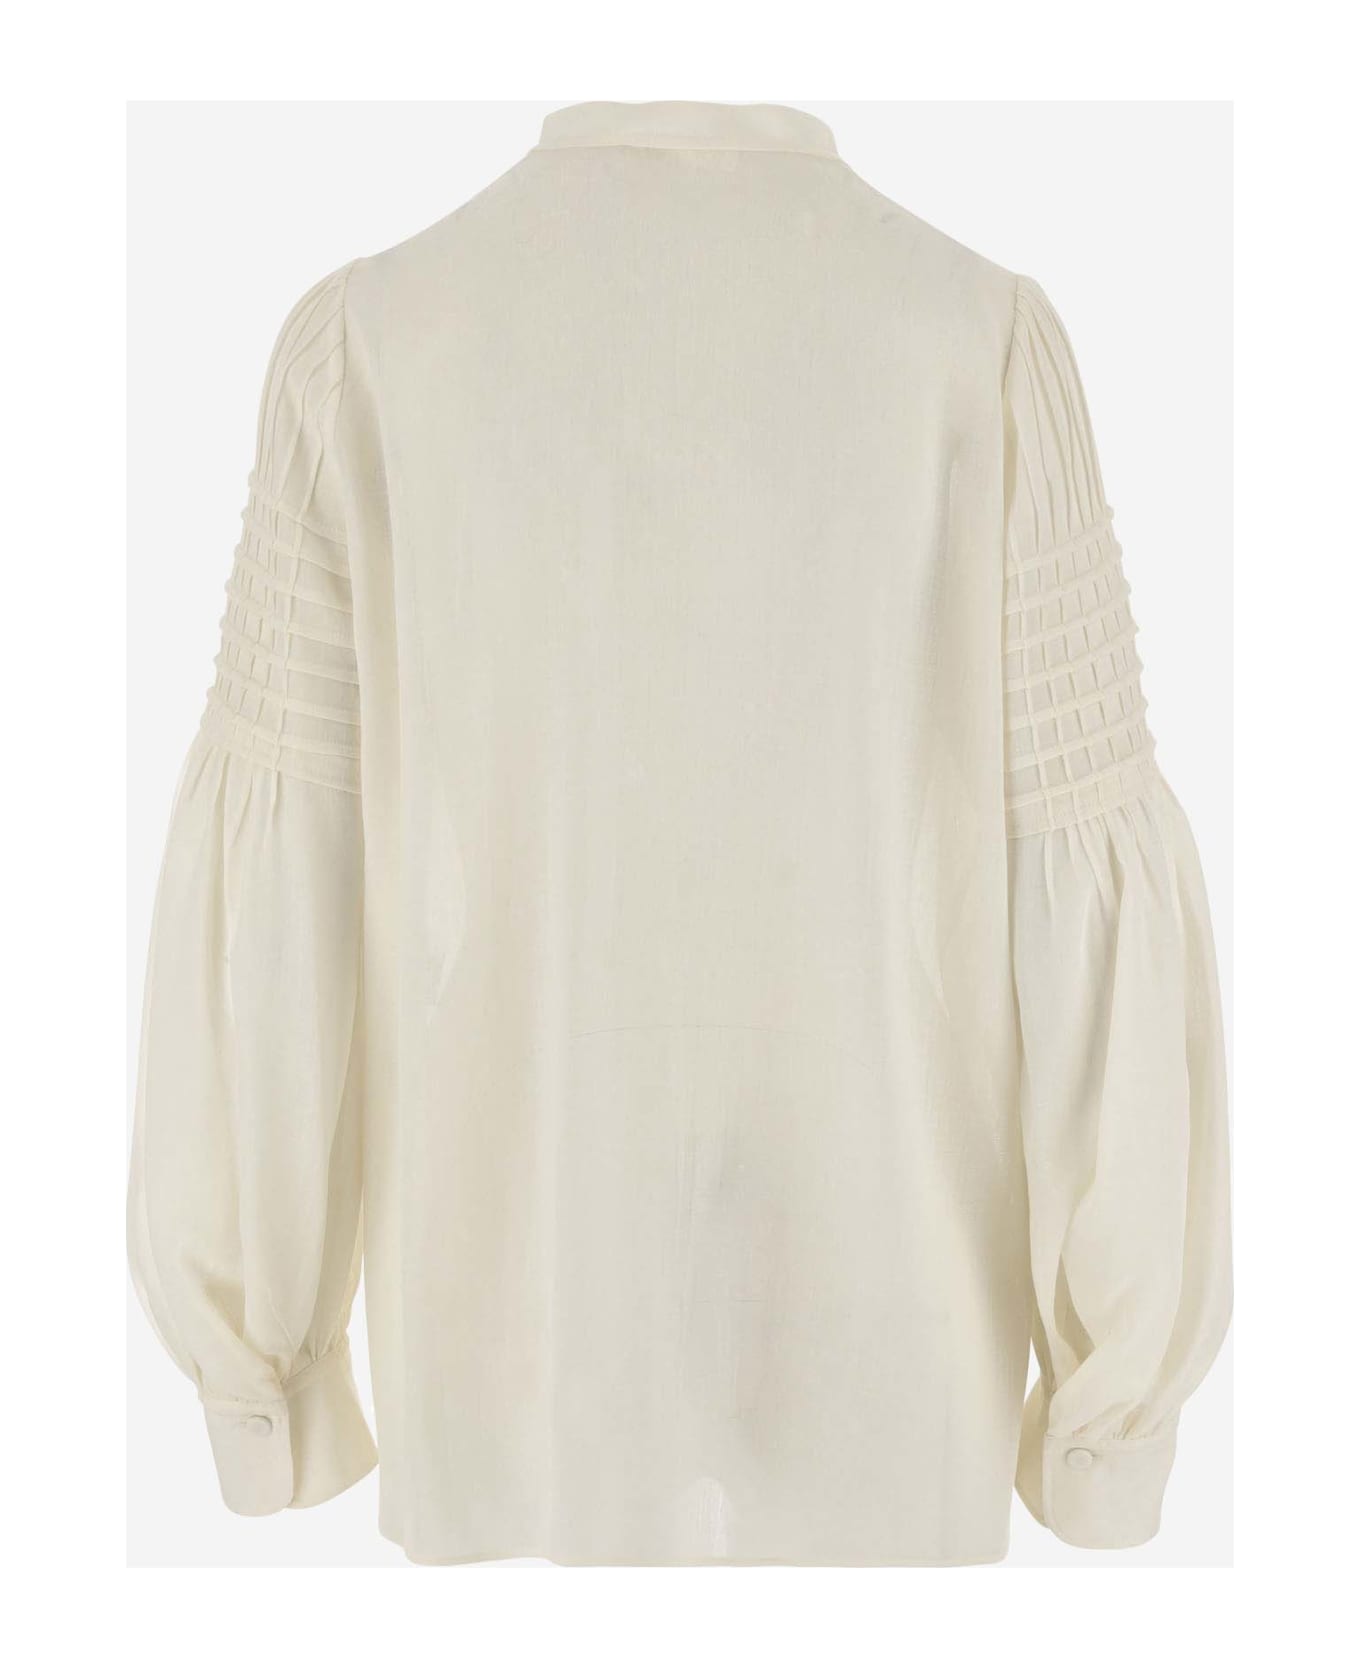 Chloé Wool Tunic Style Top - White